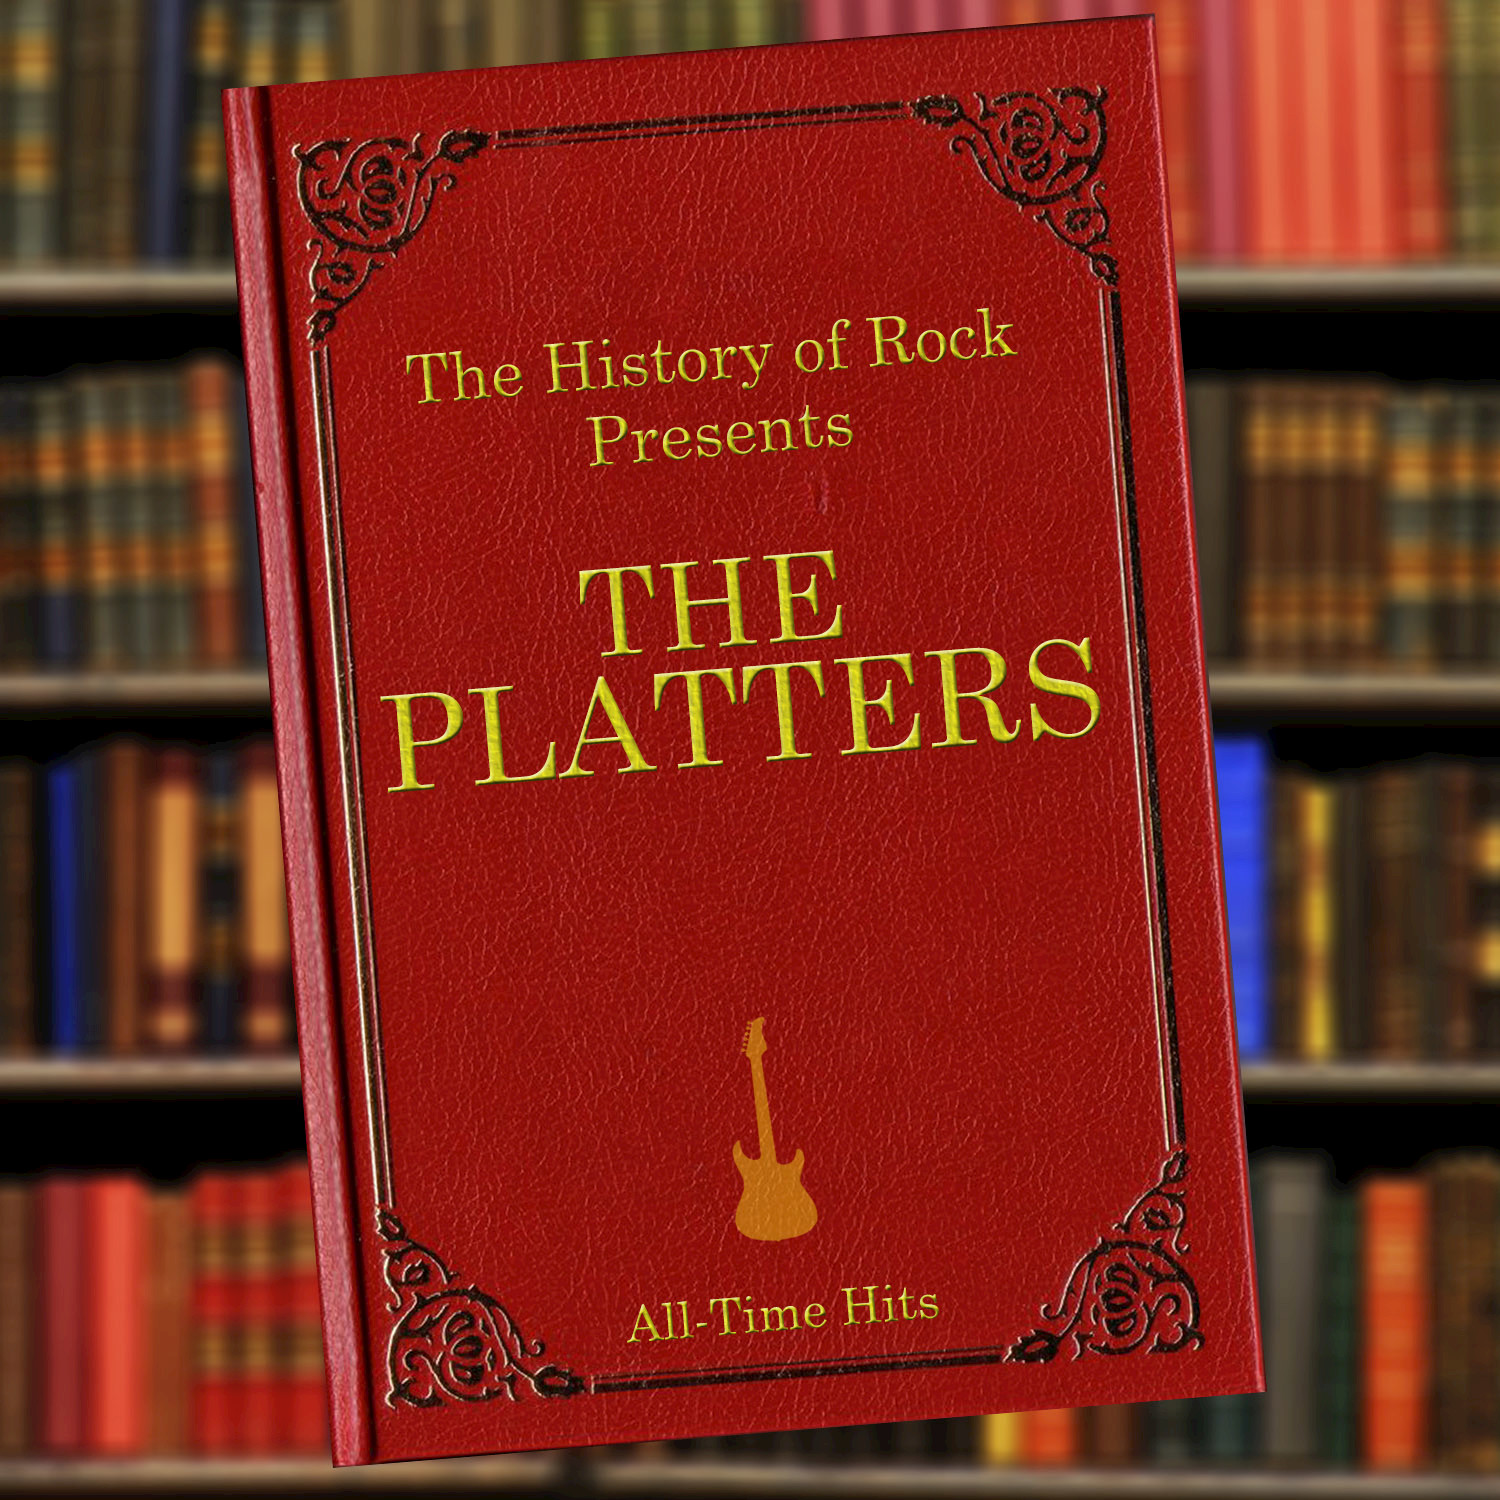 The History of Rock Presents The Platters